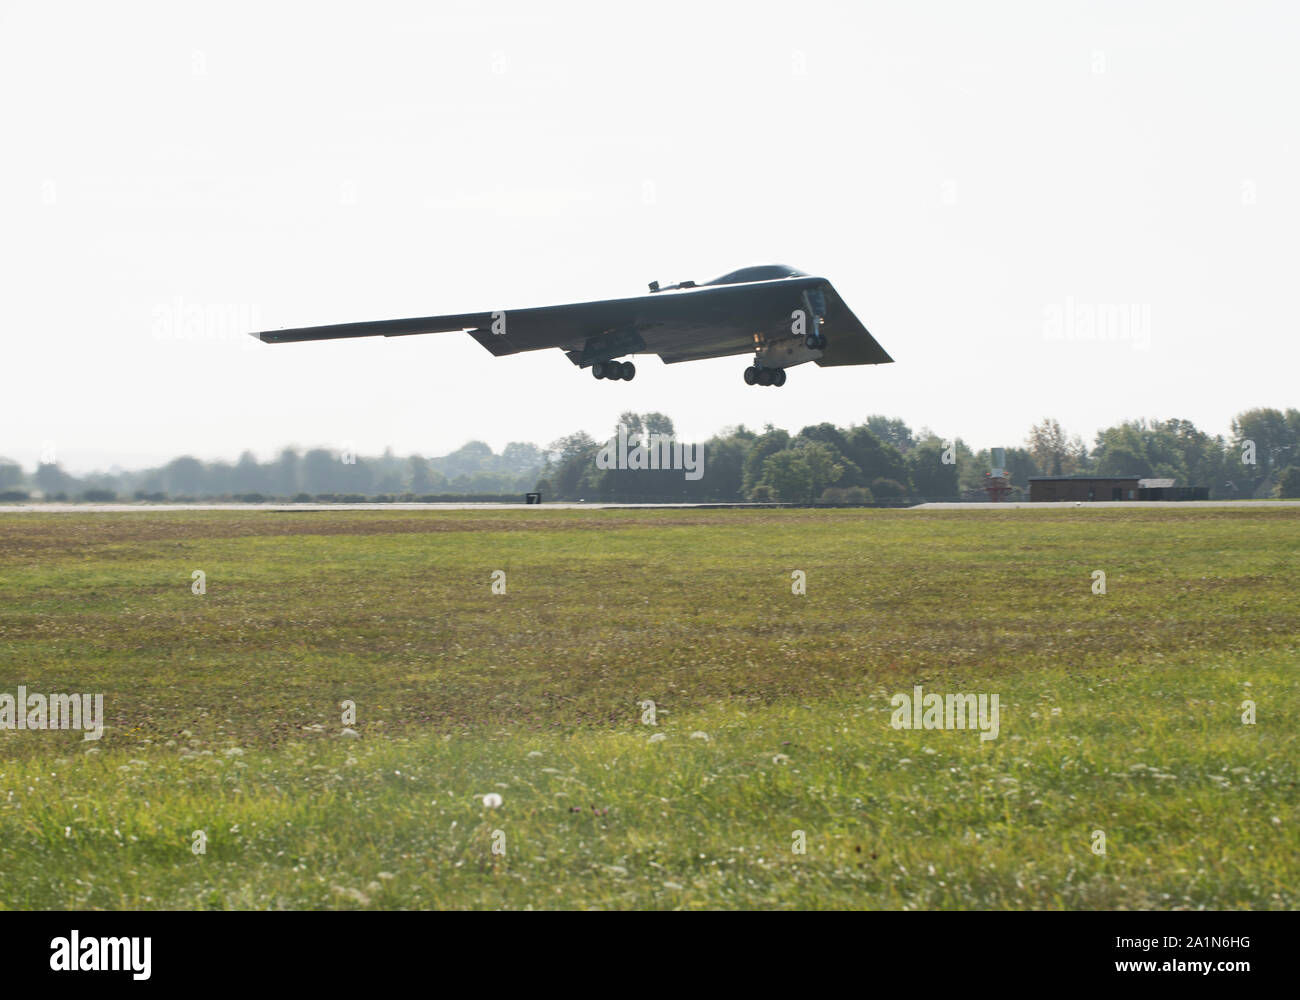 A B-2 Spirit takes off on Sept. 19, 2019, at Royal Air Force Fairford, England. Three B-2's deployed to RAF Fairford as part of Bomber Task Force Europe, which challenged the stealth aircraft, as well as Airmen and support equipment from Whiteman Air Force Base, Missouri, to confuct integration and flying operations at forward locations across Europe. (U.S. Air Force photo by Staff Sgt. Kayla White) Stock Photo